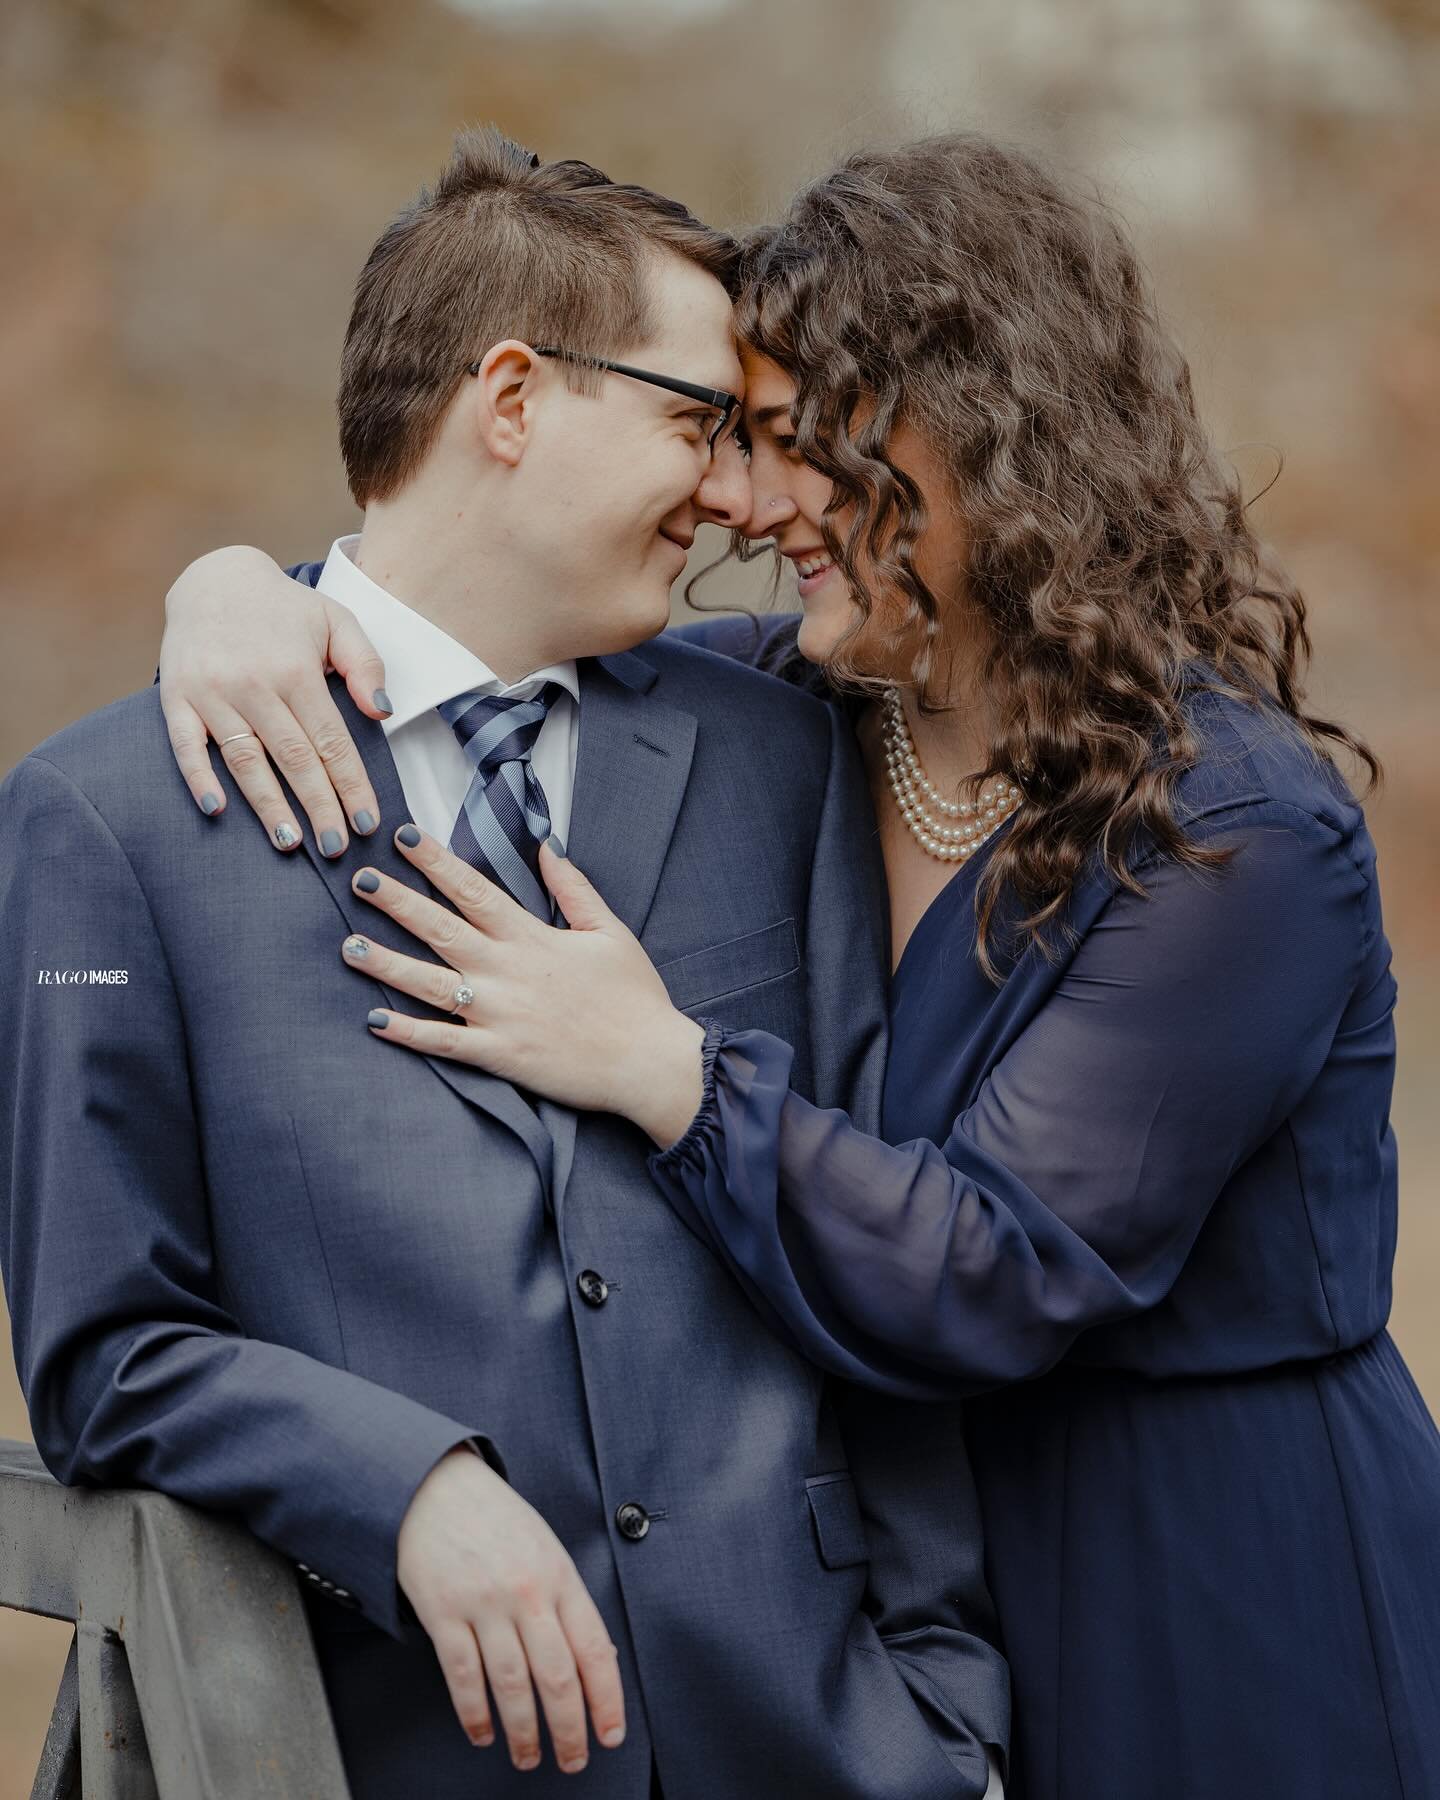 #RagoImagesProTip: Congratulations on your engagement! As you plan your engagement photoshoot, infuse a touch of dapper elegance with the juxtaposition of nature. Here are three tips to help you dress formally yet seamlessly blend with the beauty of 